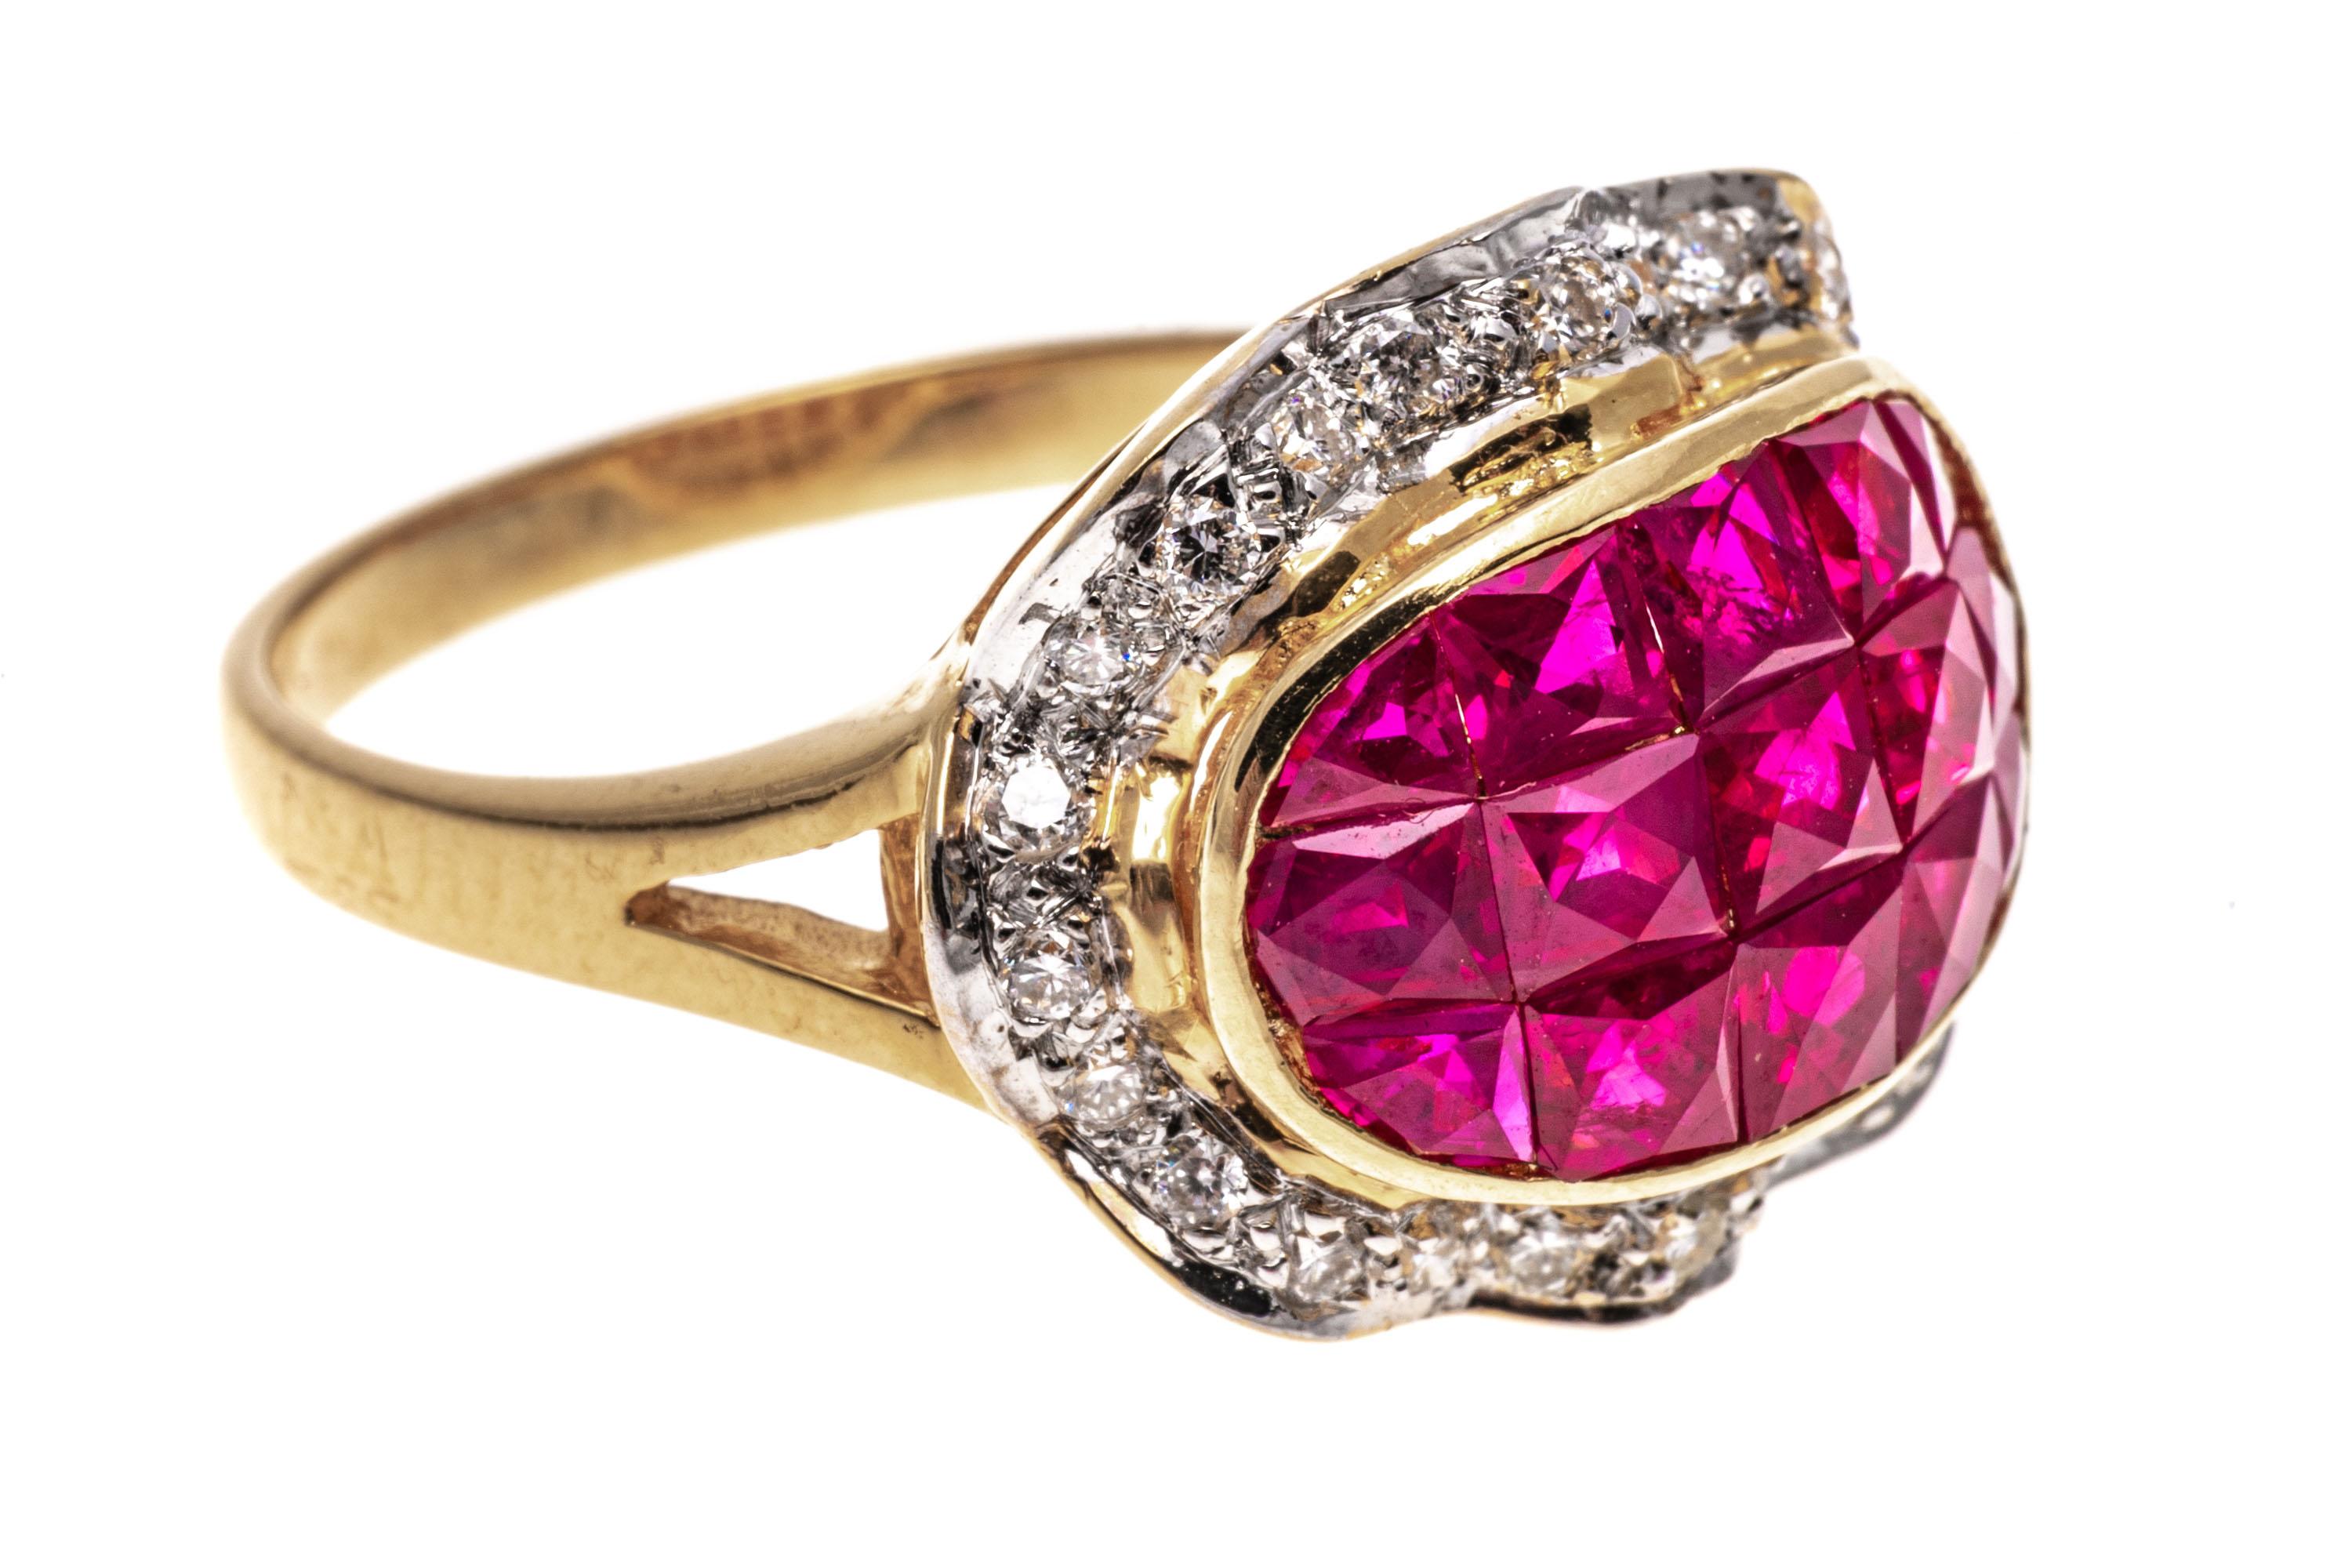 18k Yellow Gold Calibre Cut Ruby Ring With Ruffled Diamond Border, Size 7 For Sale 1